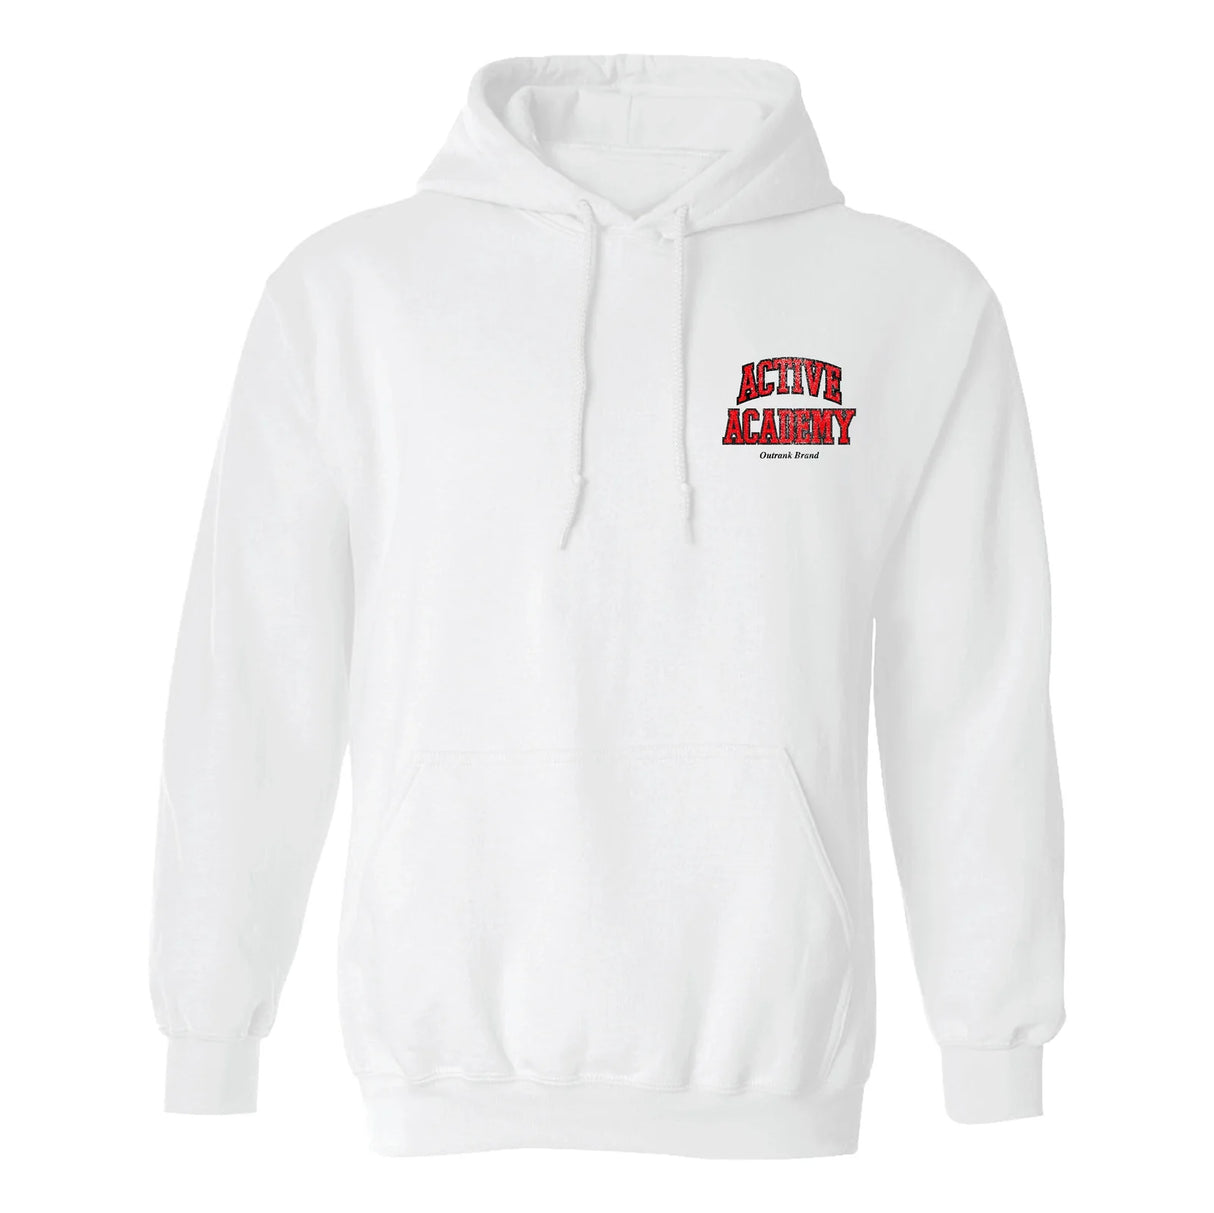 Outrank - Hoodie - Active Academy - White